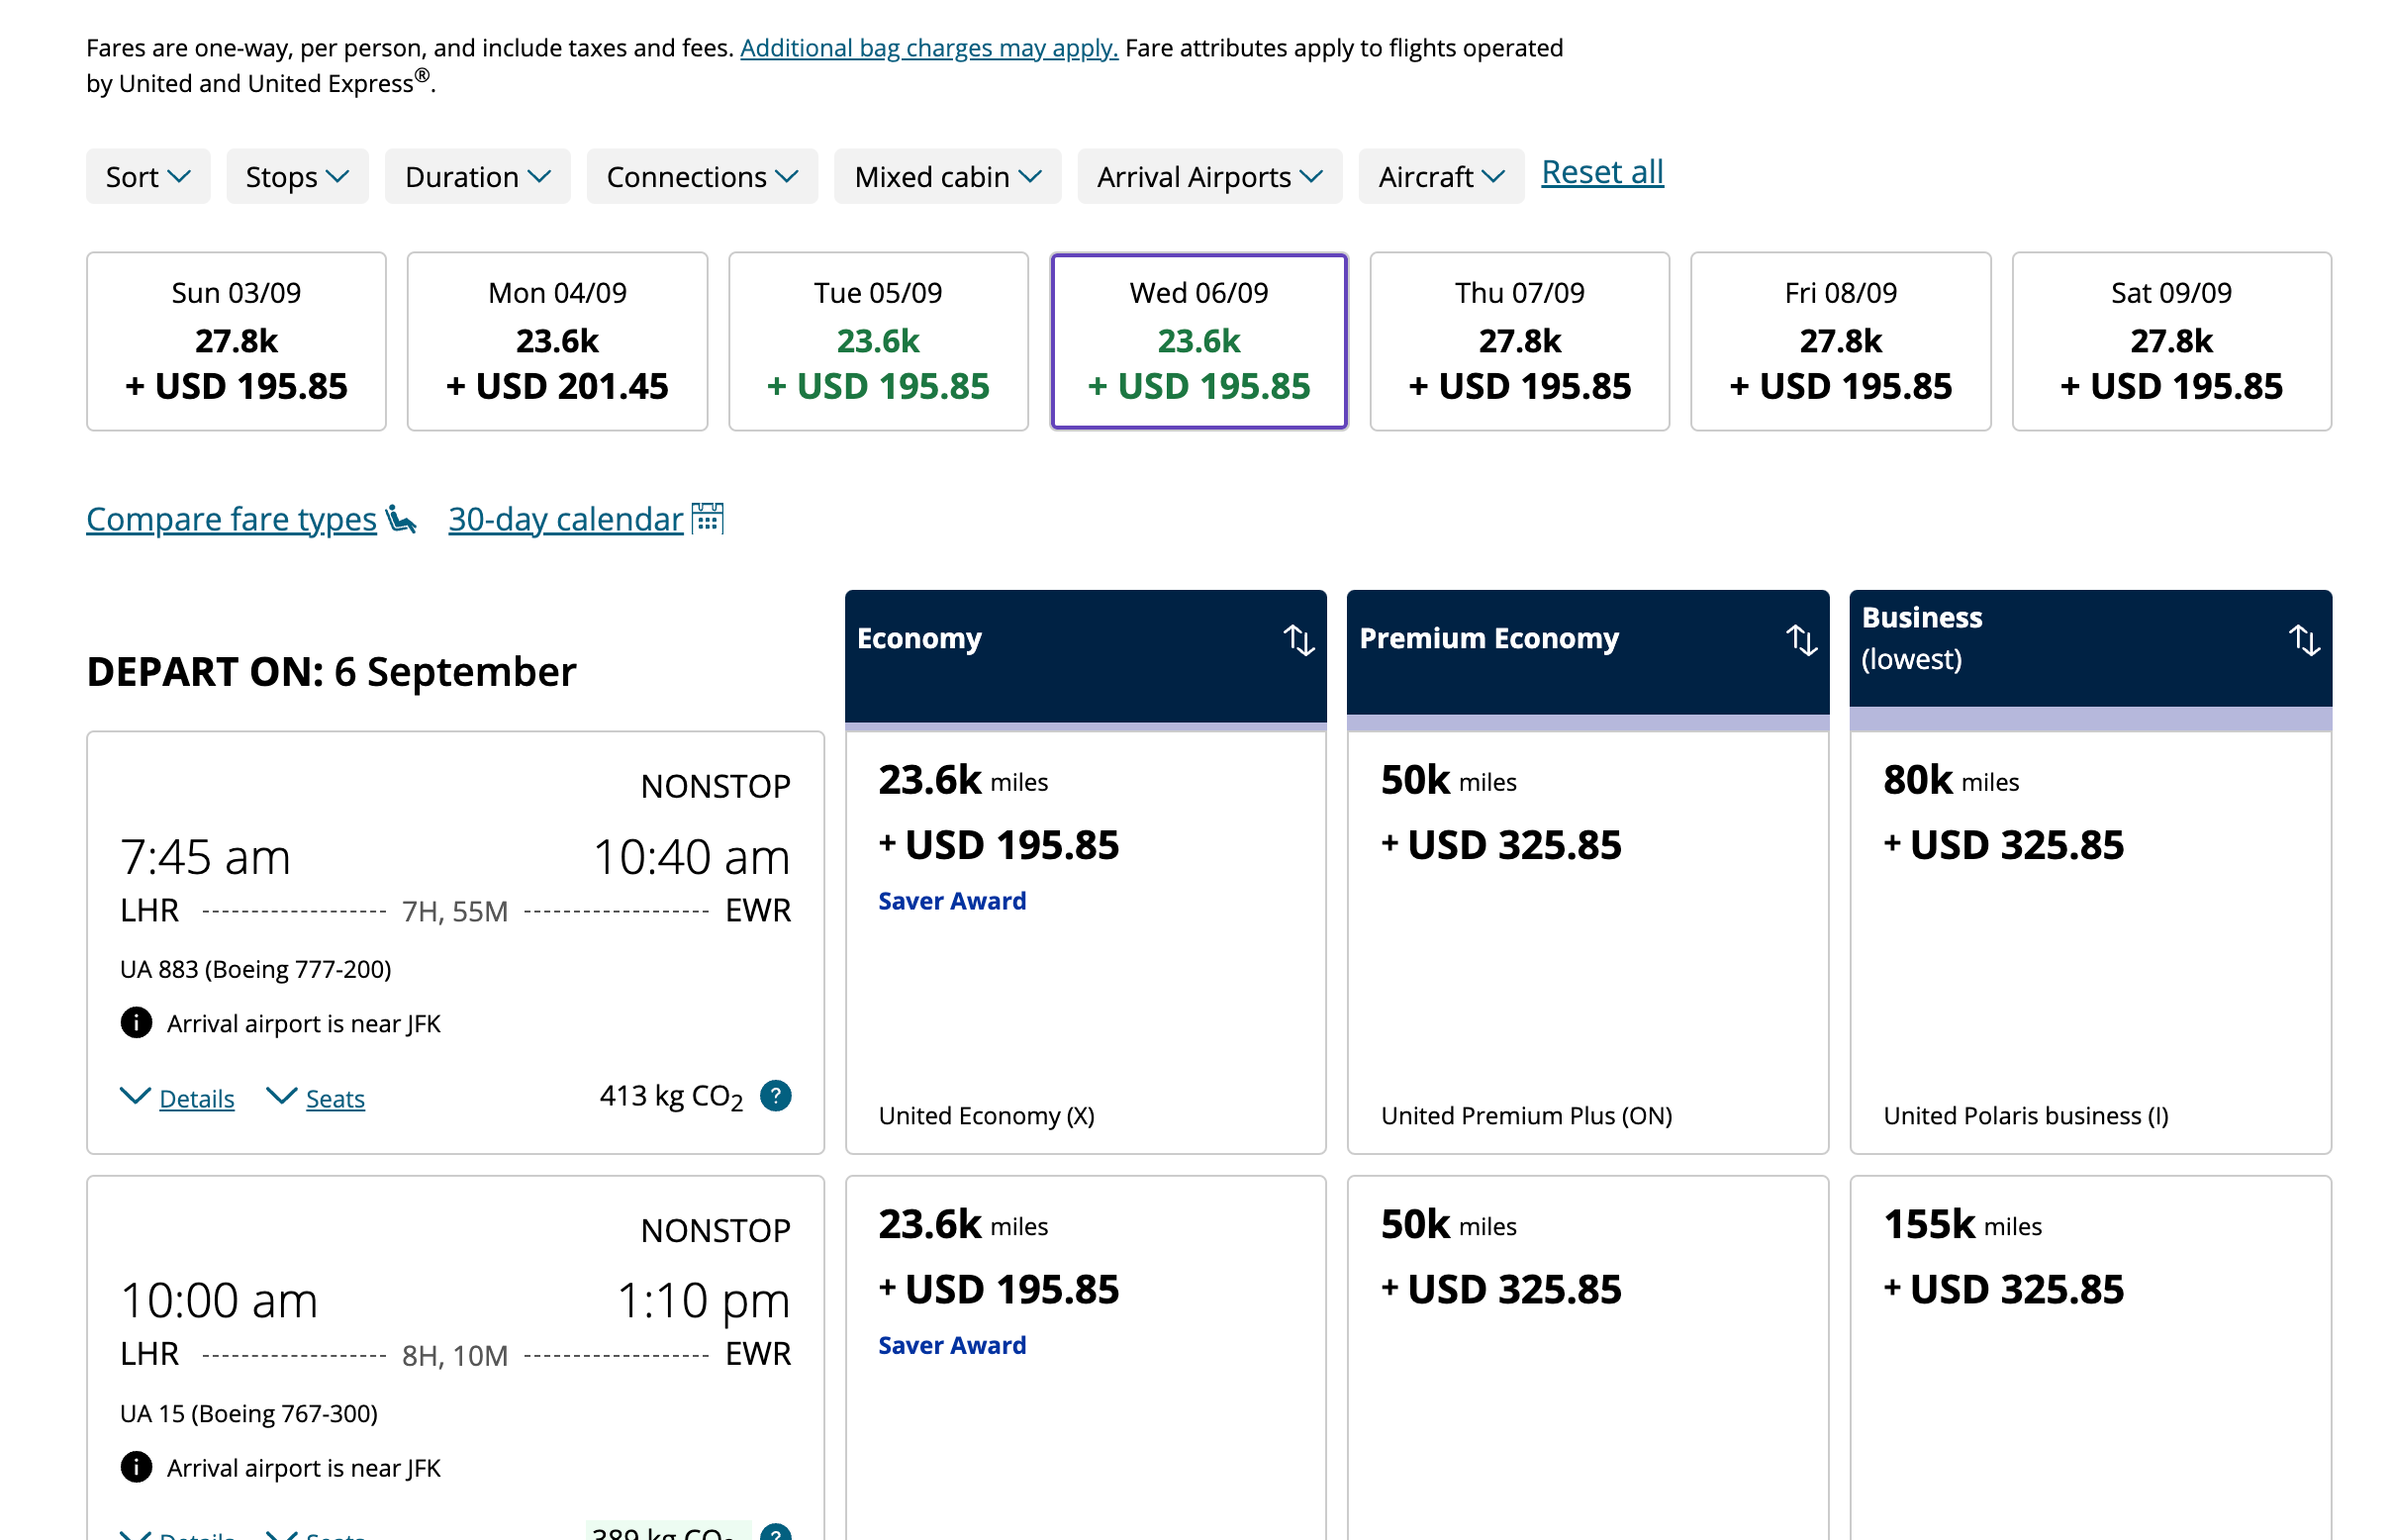 A screenshot of the United Airlines Booking page, showing the cost in miles of a flight from London to Newark.